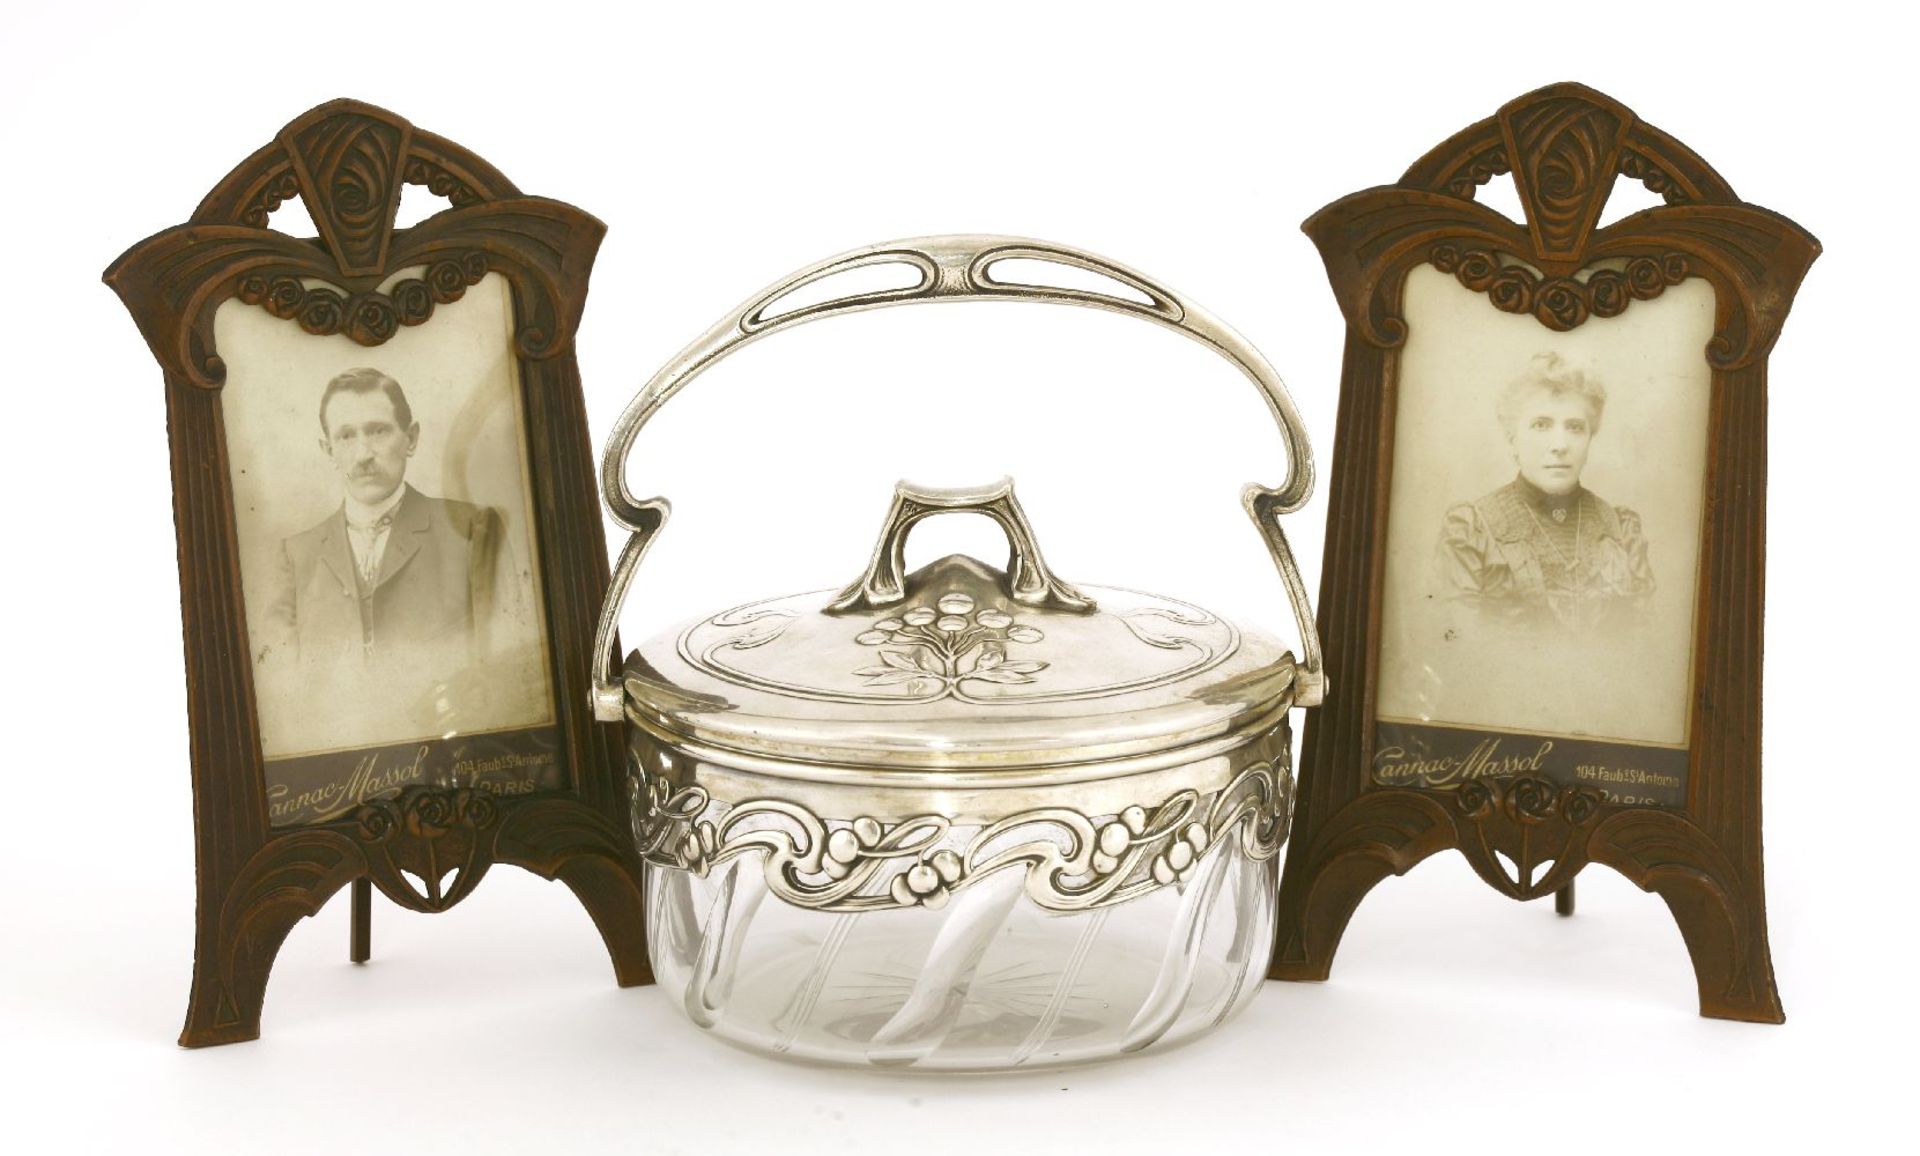 A WMF silver-plated preserve dish and cover,with a swing handle, with a stylised pierced mount and